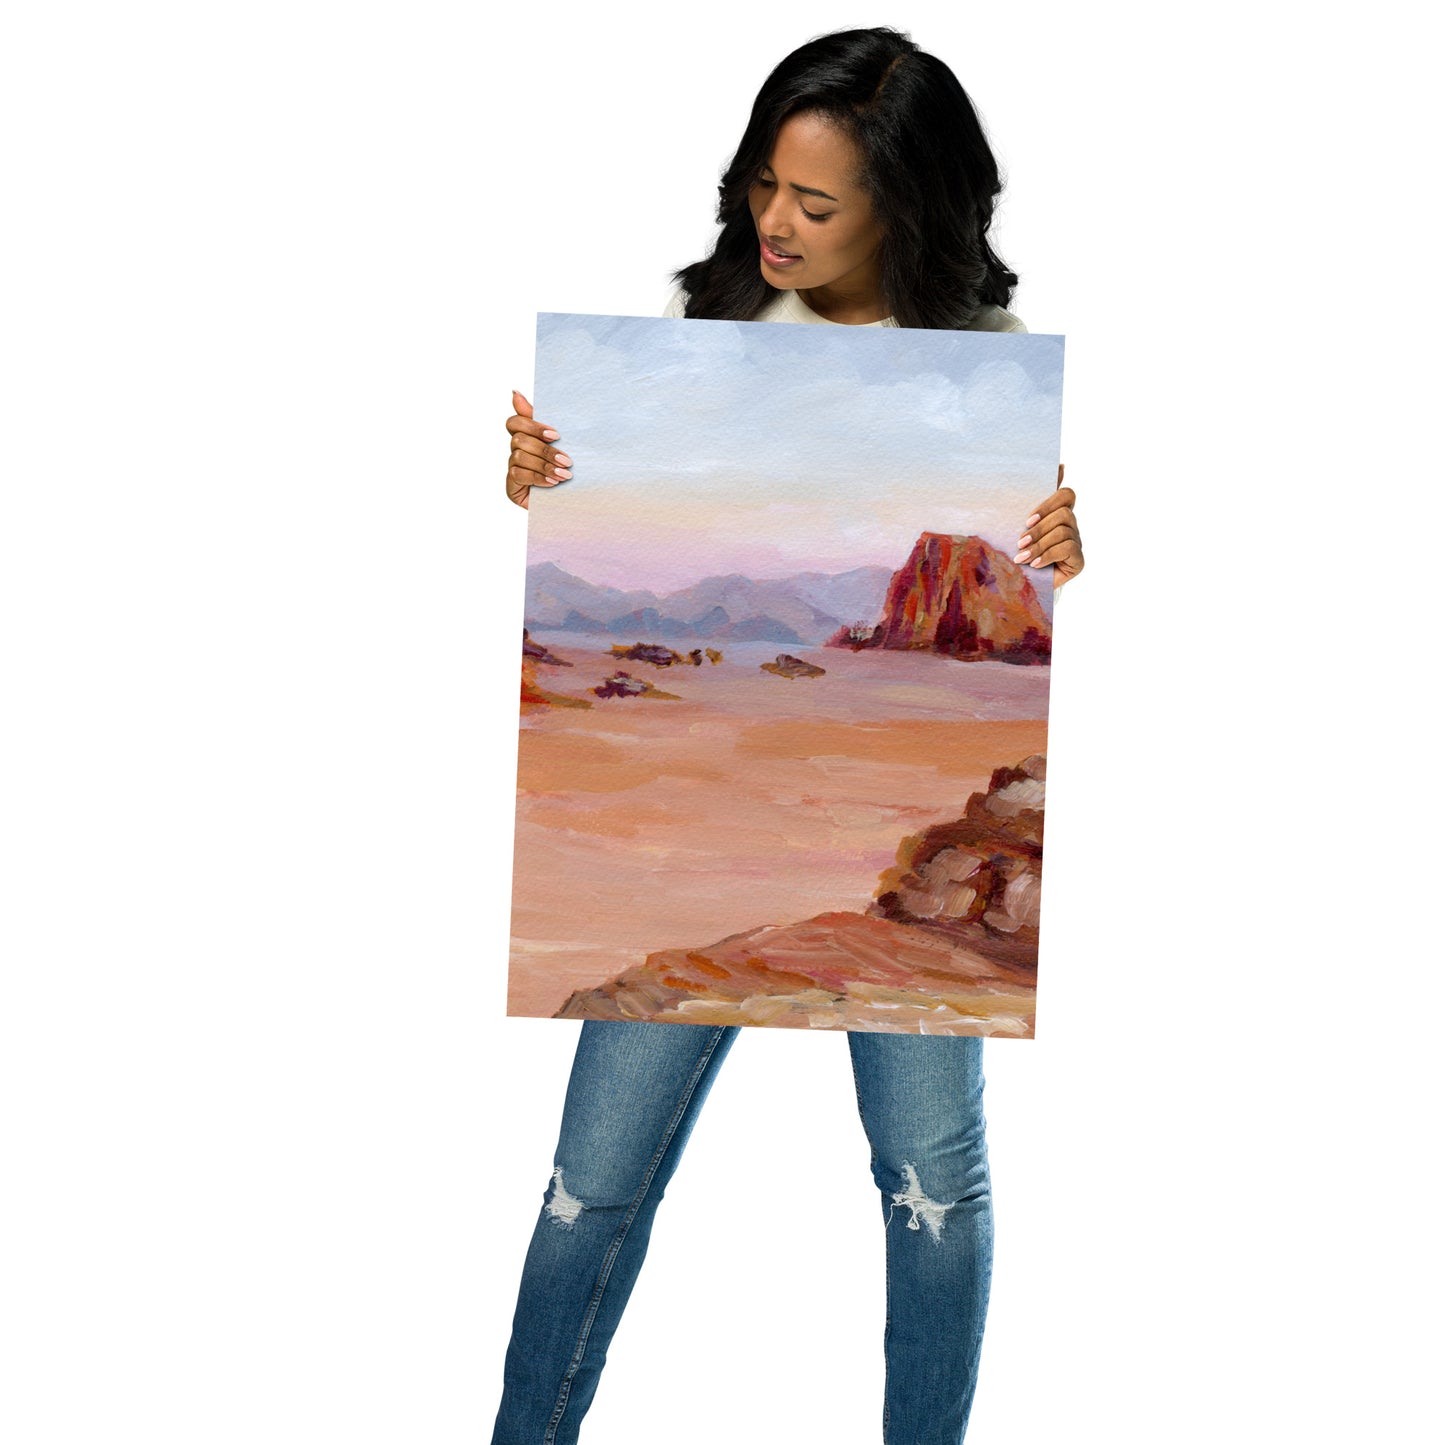 "The Warmth of Sand and Rocks" Print